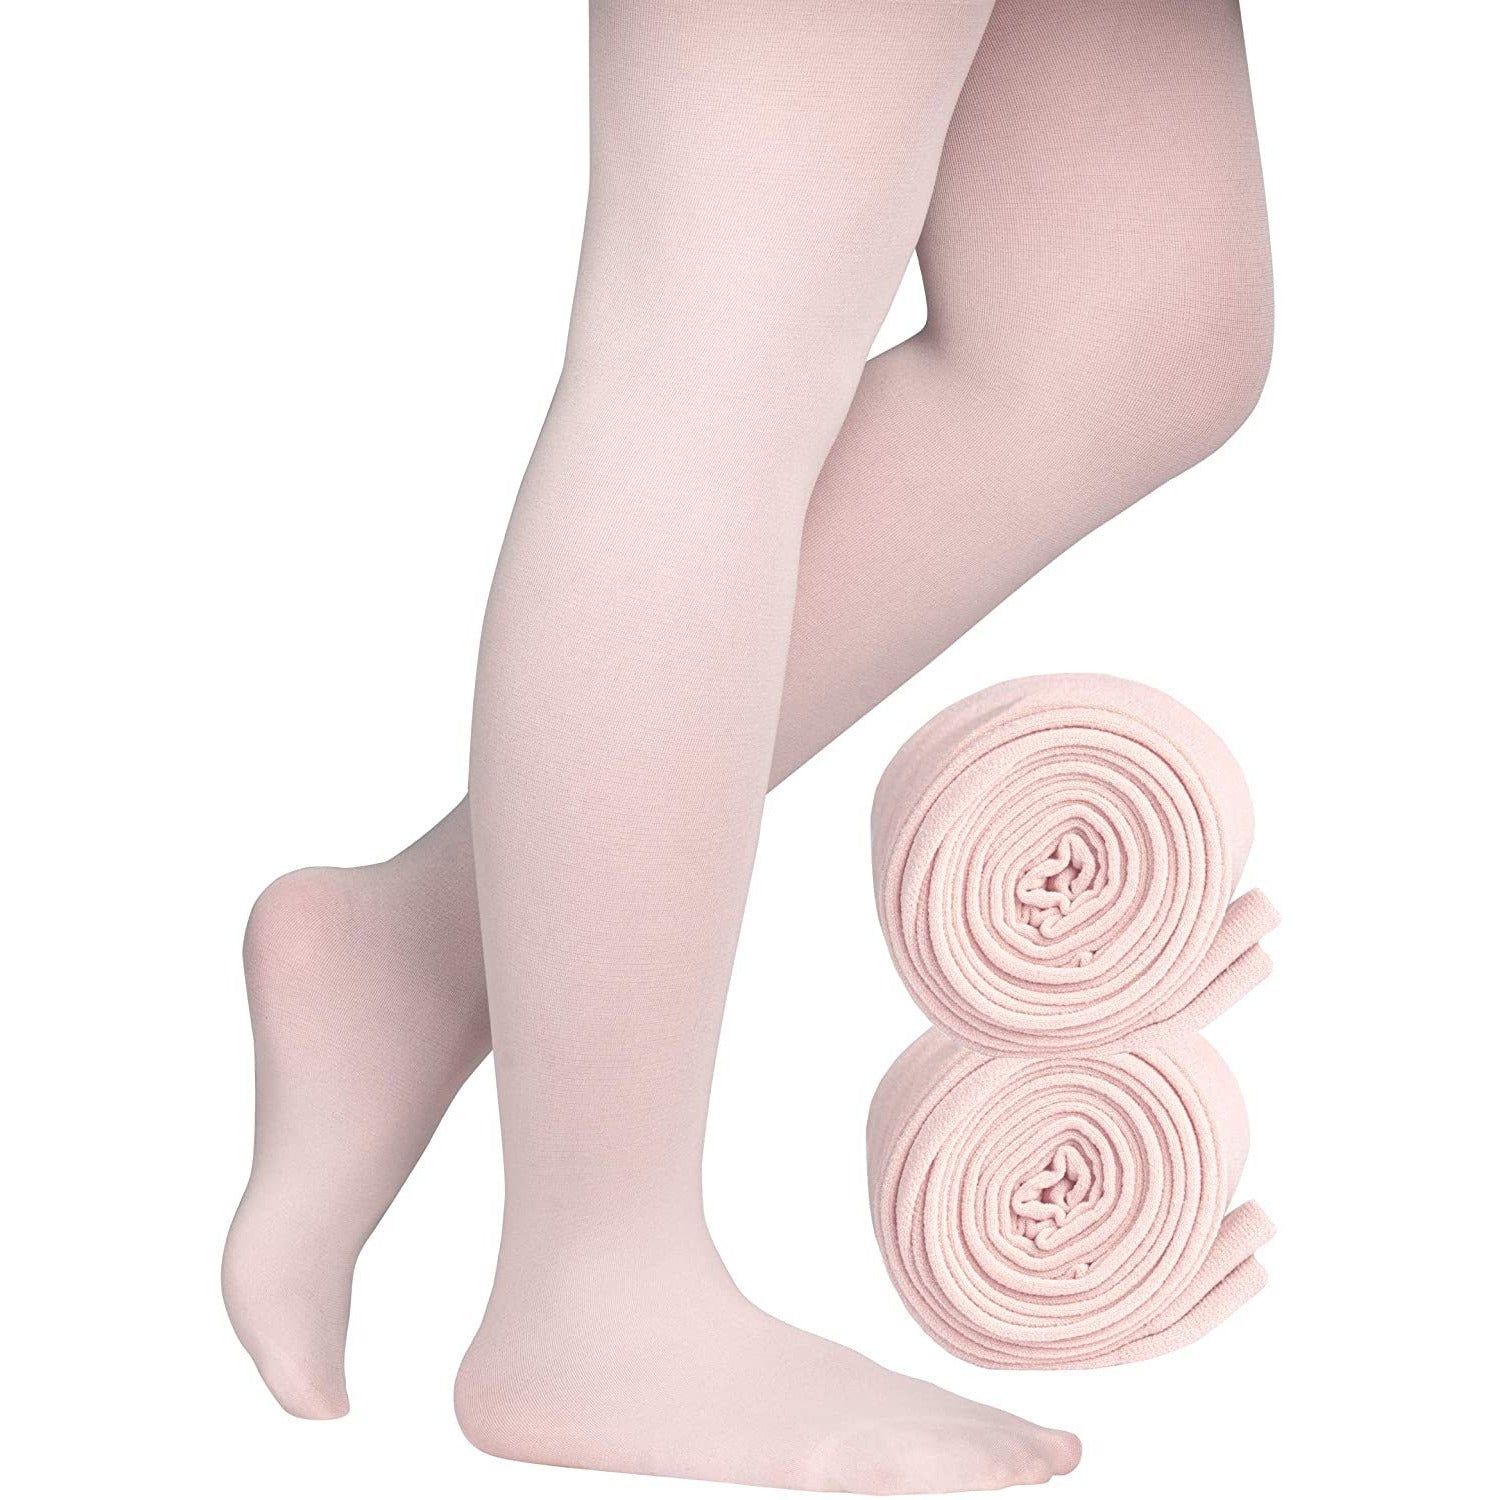 Girls' Students Footed Ballet Dance School Tights